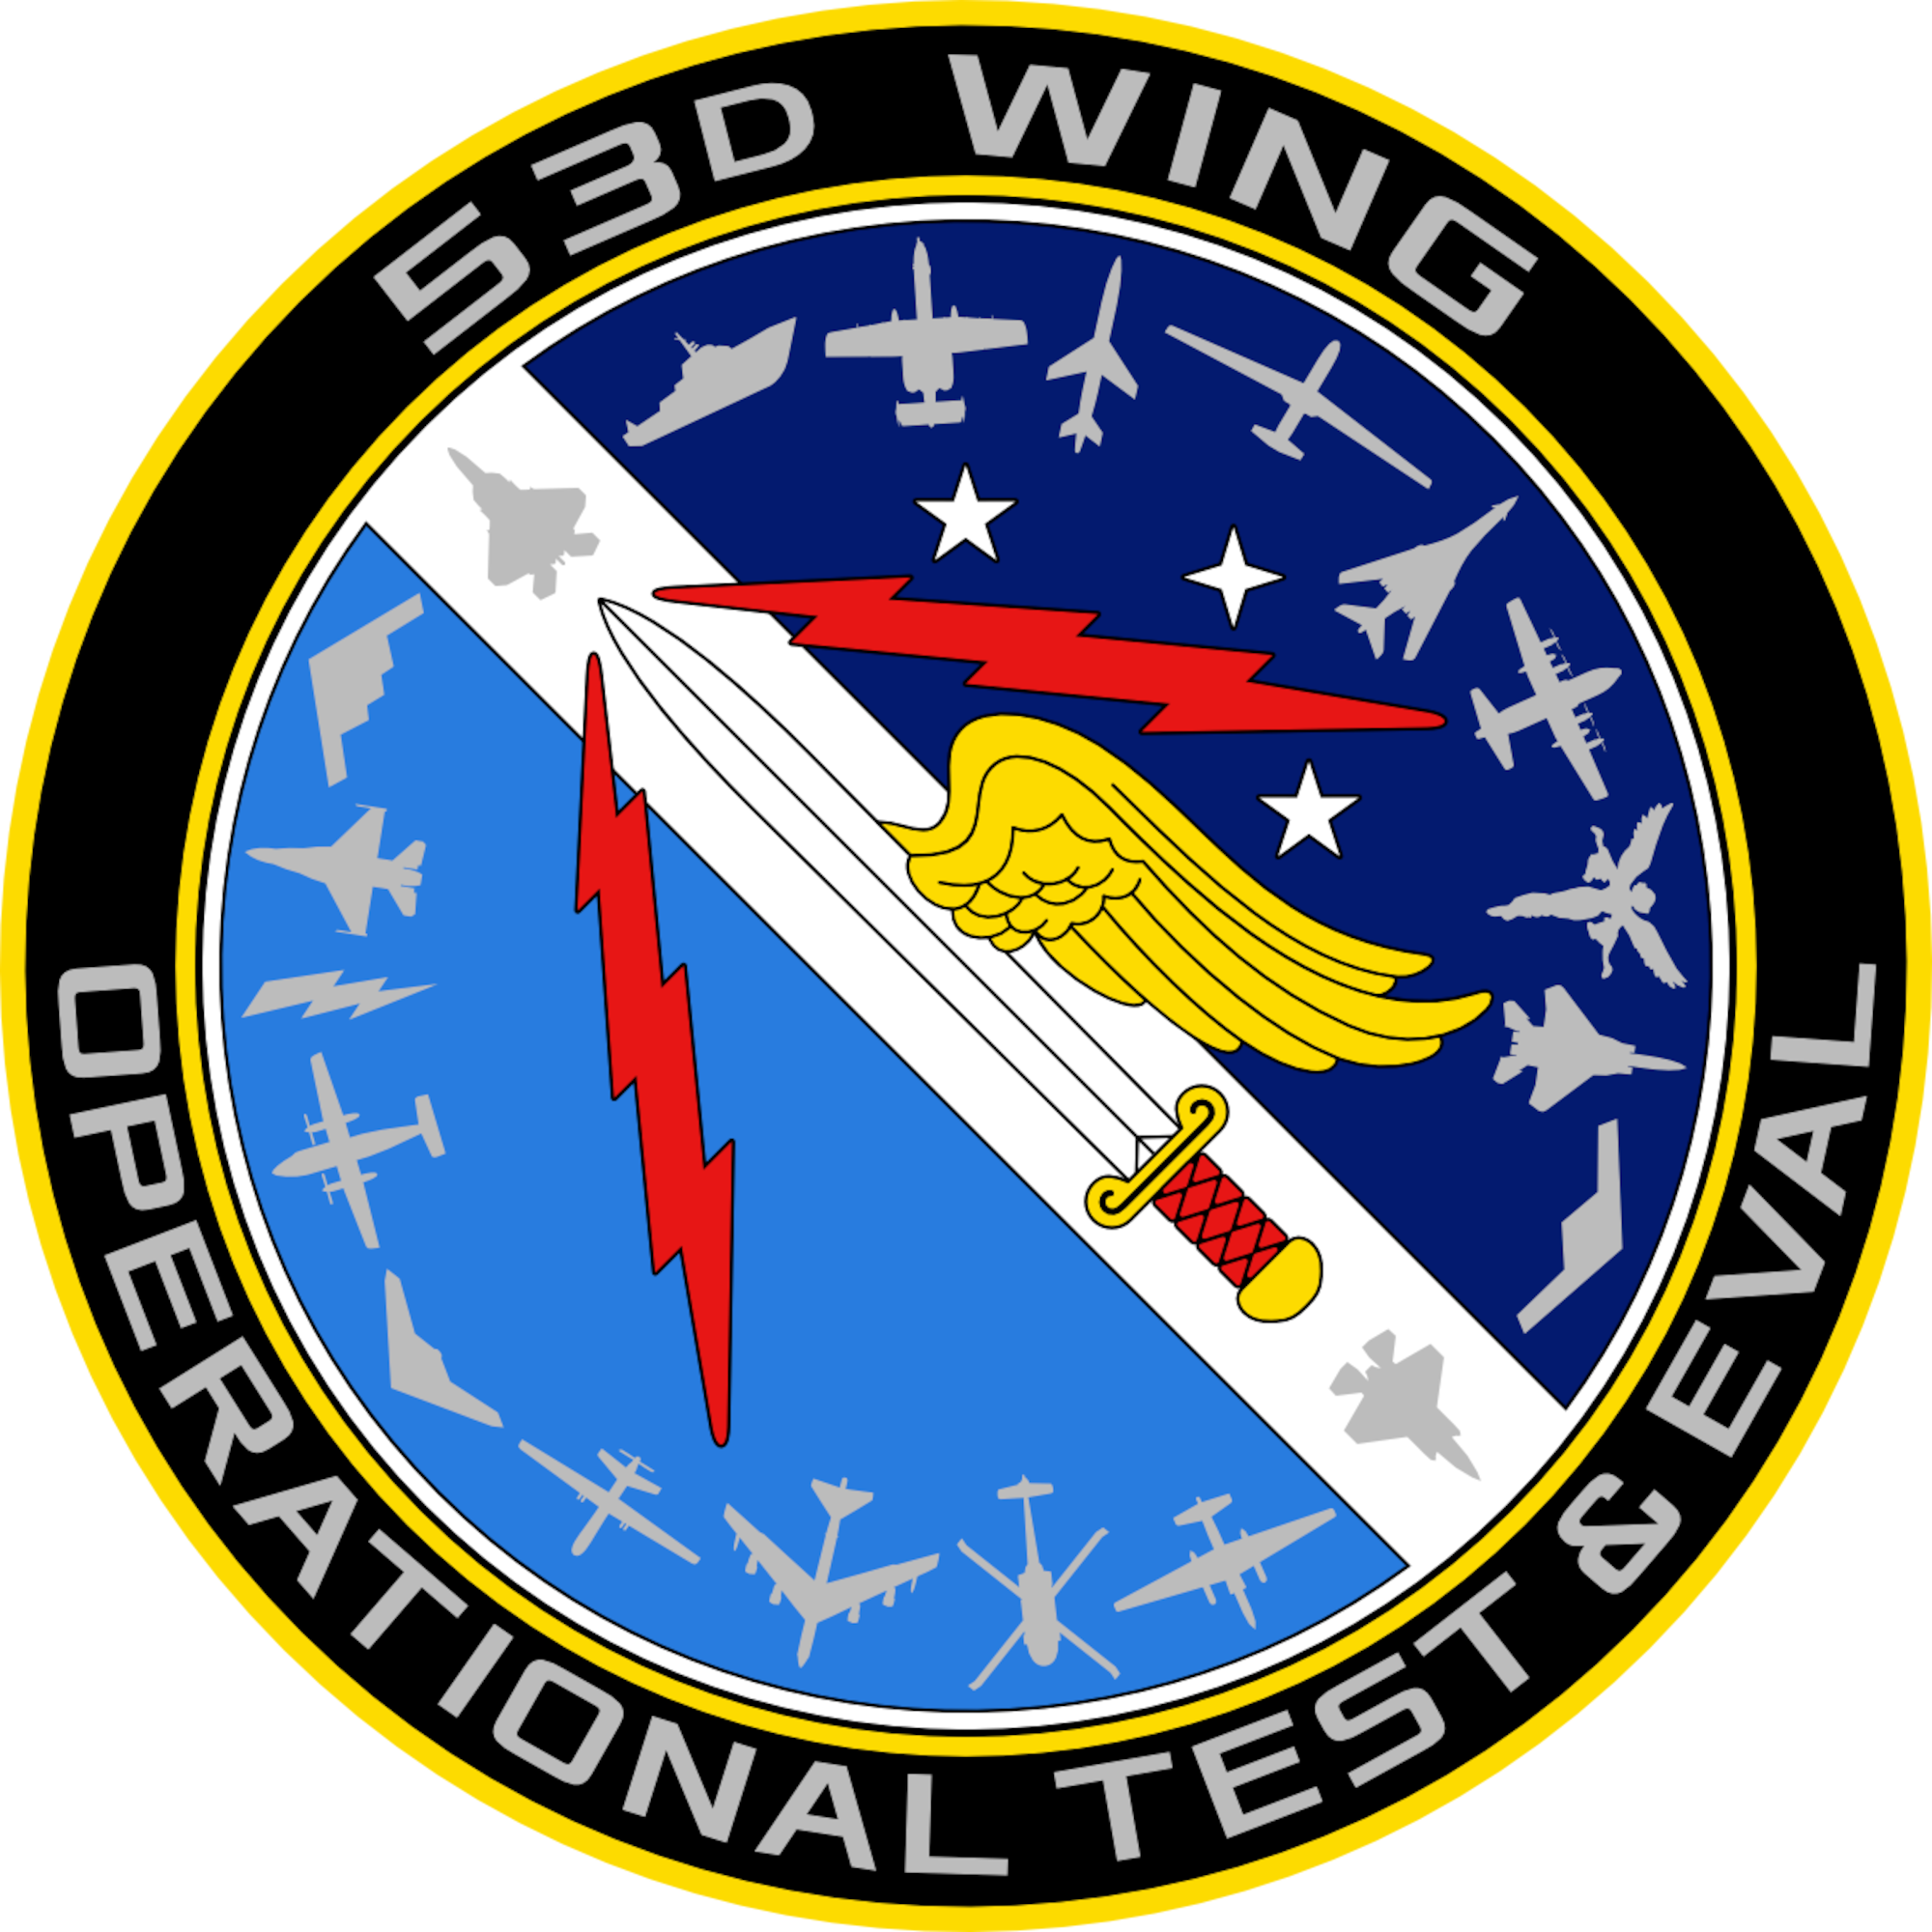 The 53rd Wing provides tactical advantage to the warfighter at the speed of relevance. By testing new operational capabilities and evaluating fielded capabilities, the 53rd Wing is bringing the future faster while answering the warfighter’s demands for integrated, multi-domain capabilities.